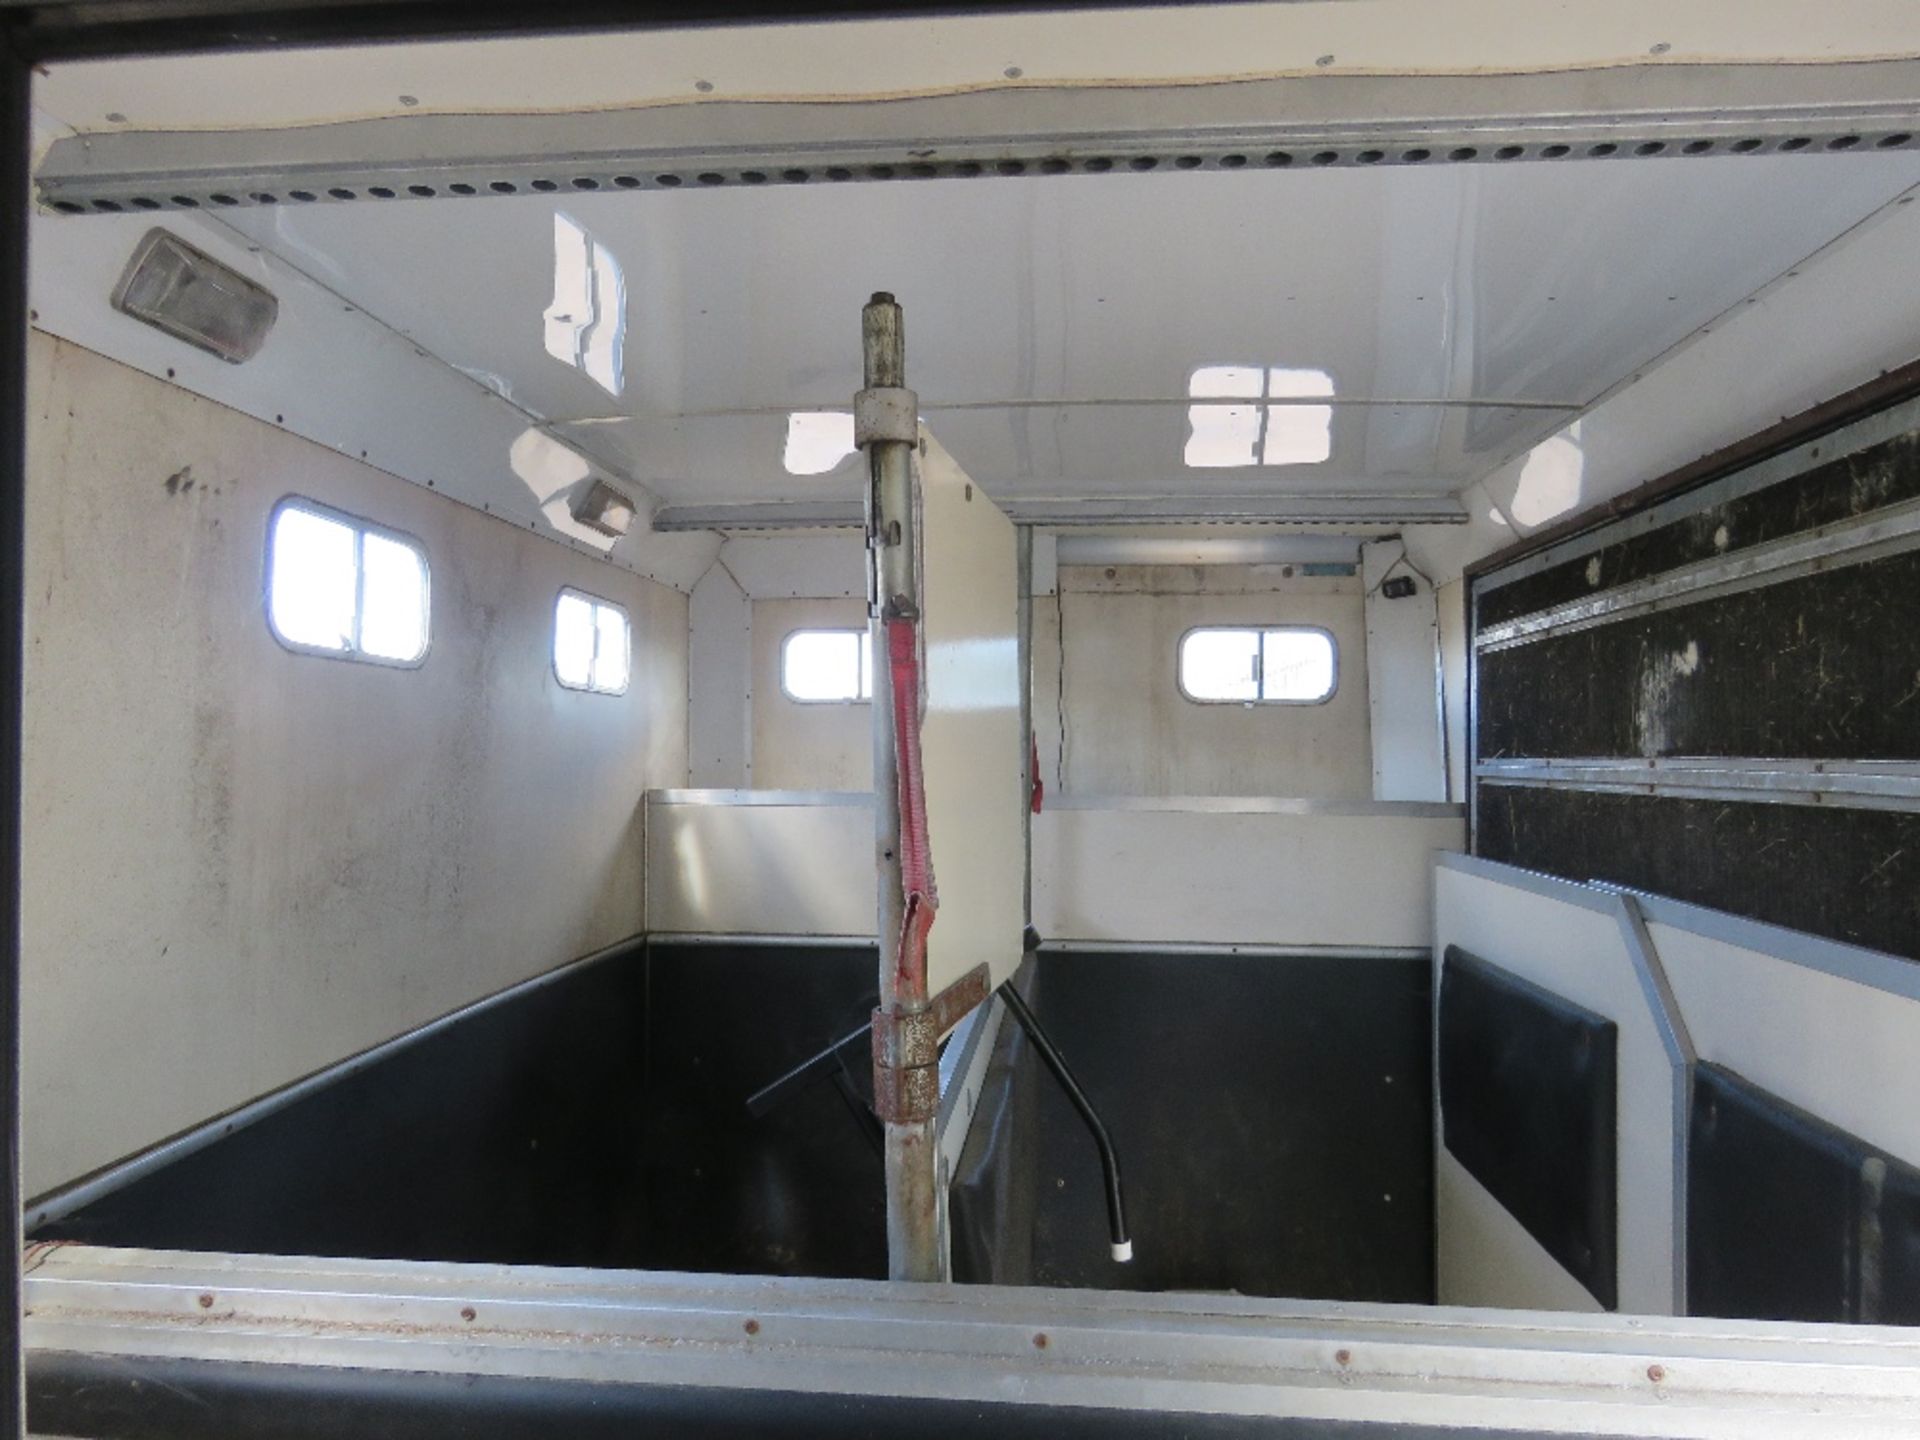 MITSUBISHI CANTER HORSE BOX LORRY REG:GK09 OXG. V5 AND PLATING CERTIFICATE IN OFFICE. MOT EXPIRED. - Bild 16 aus 24